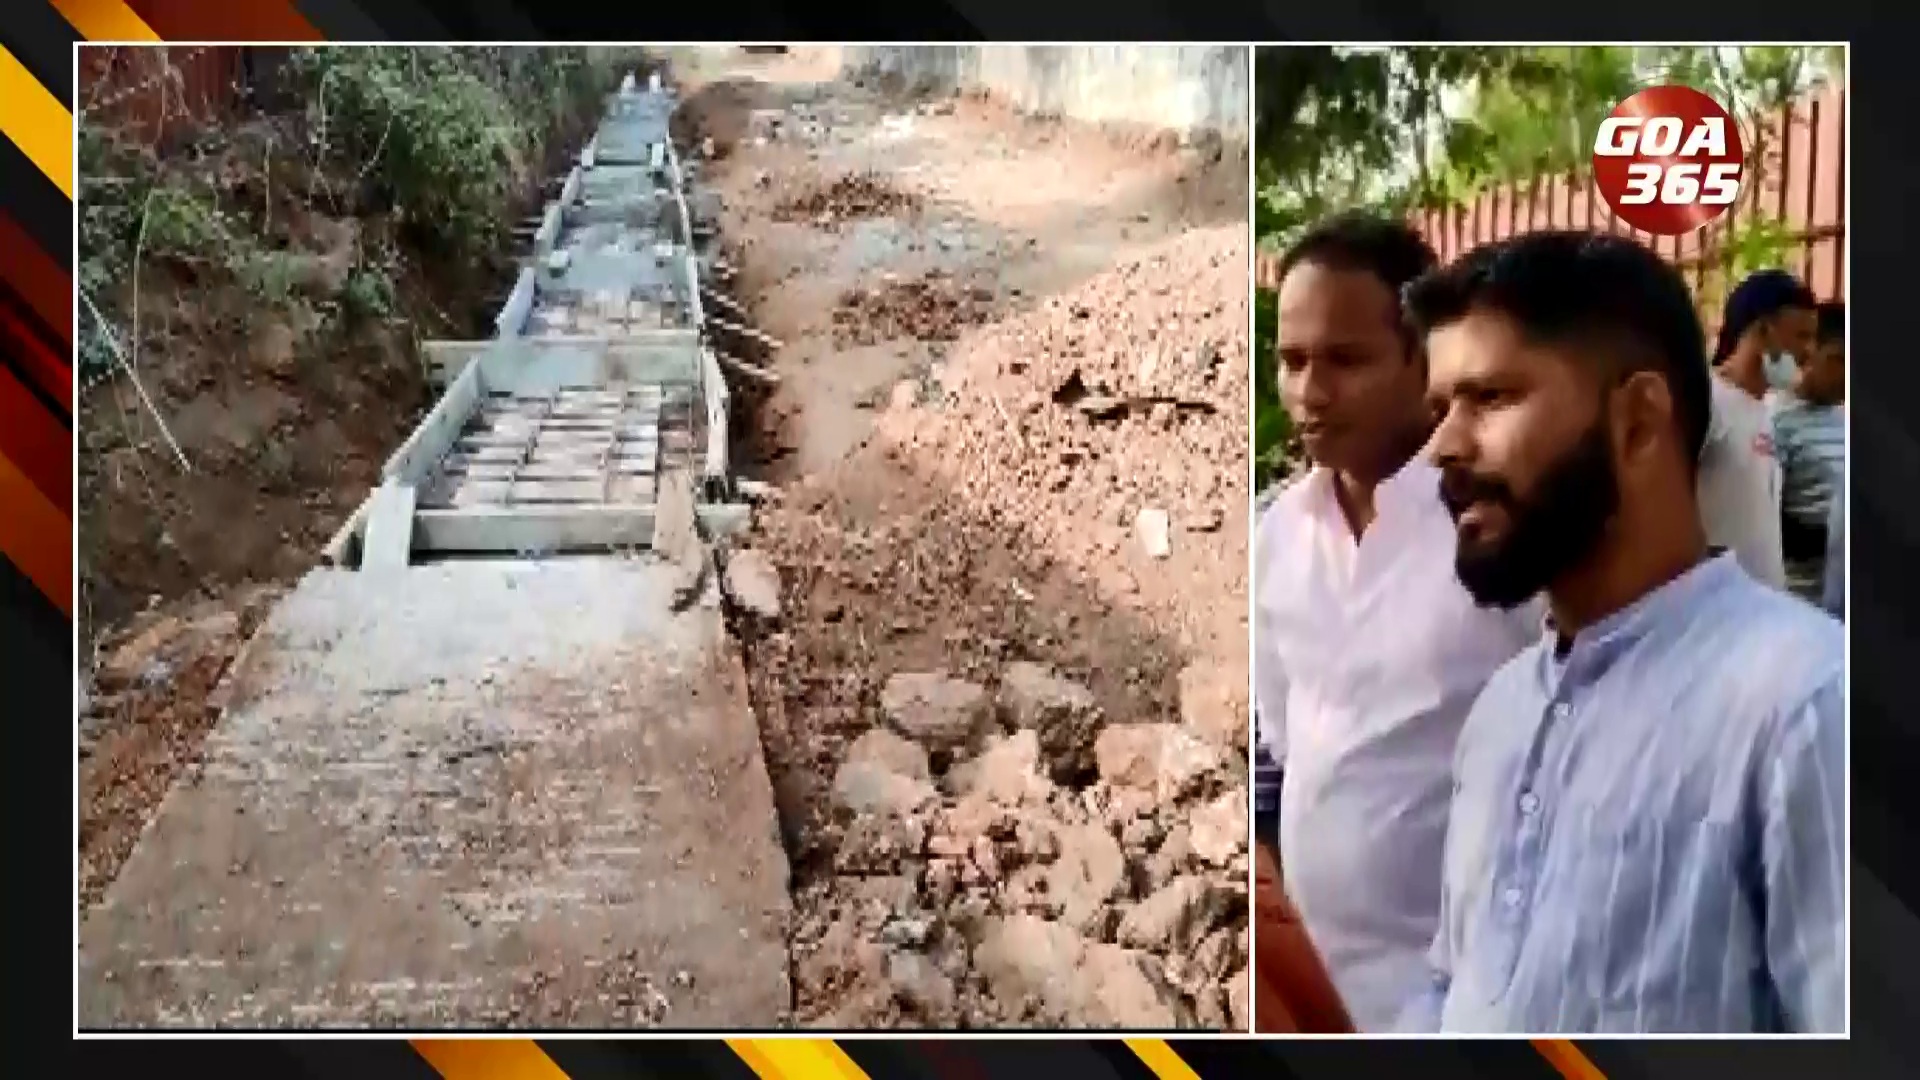 Assagao locals up in arms over illegal road || GOA365